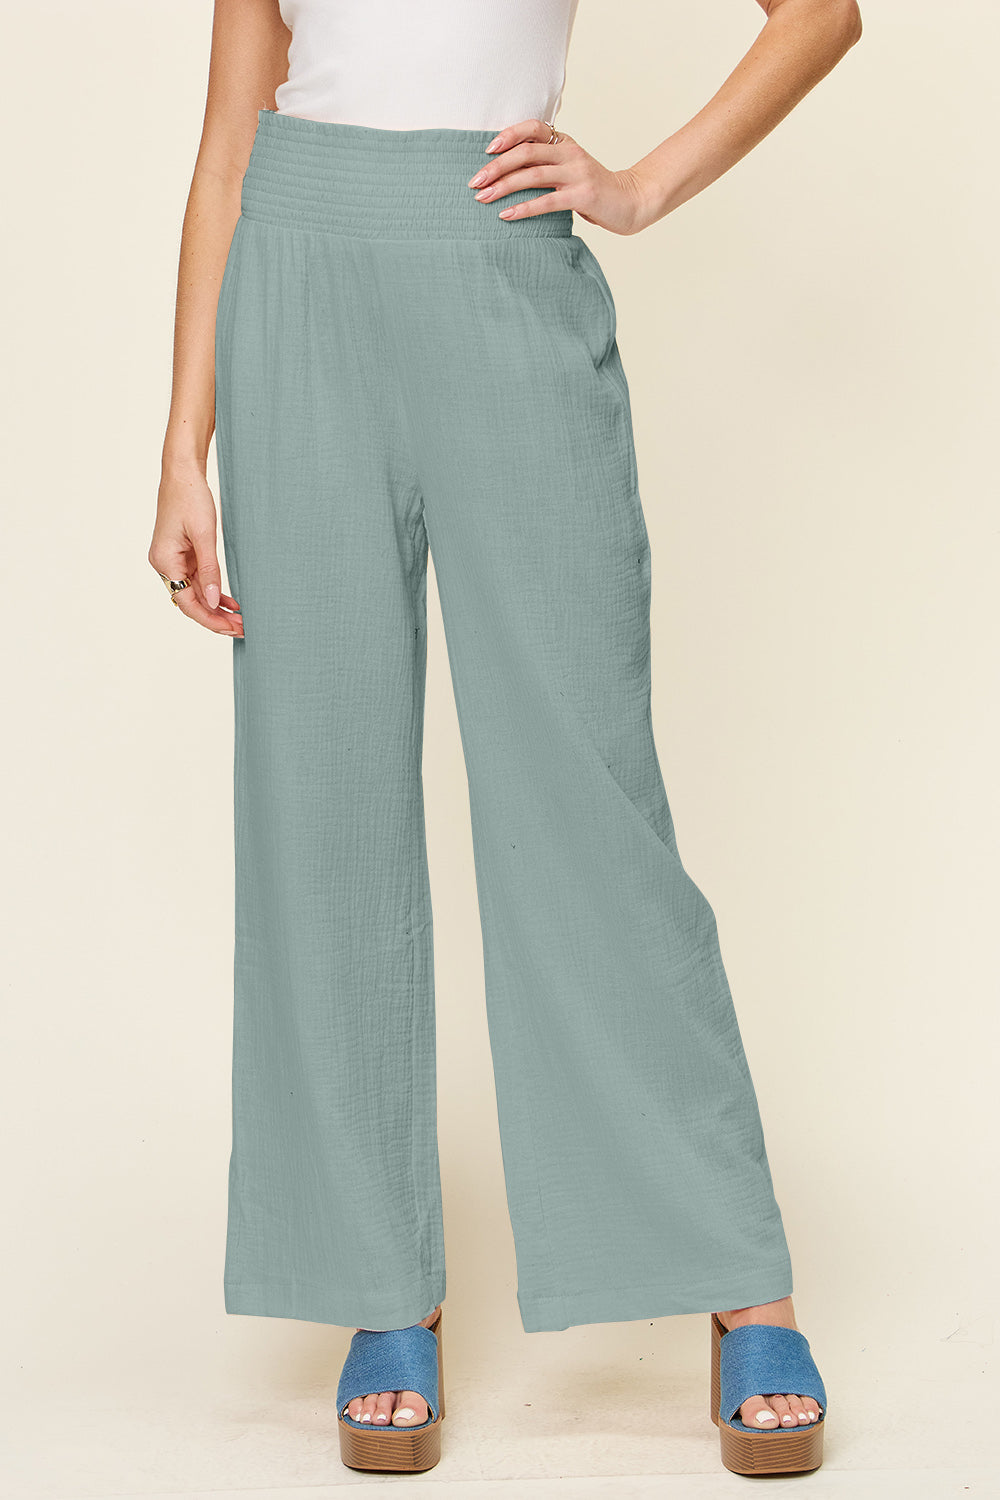 Double Take Full Size Texture Smocked Waist Wide Leg Pants Teal